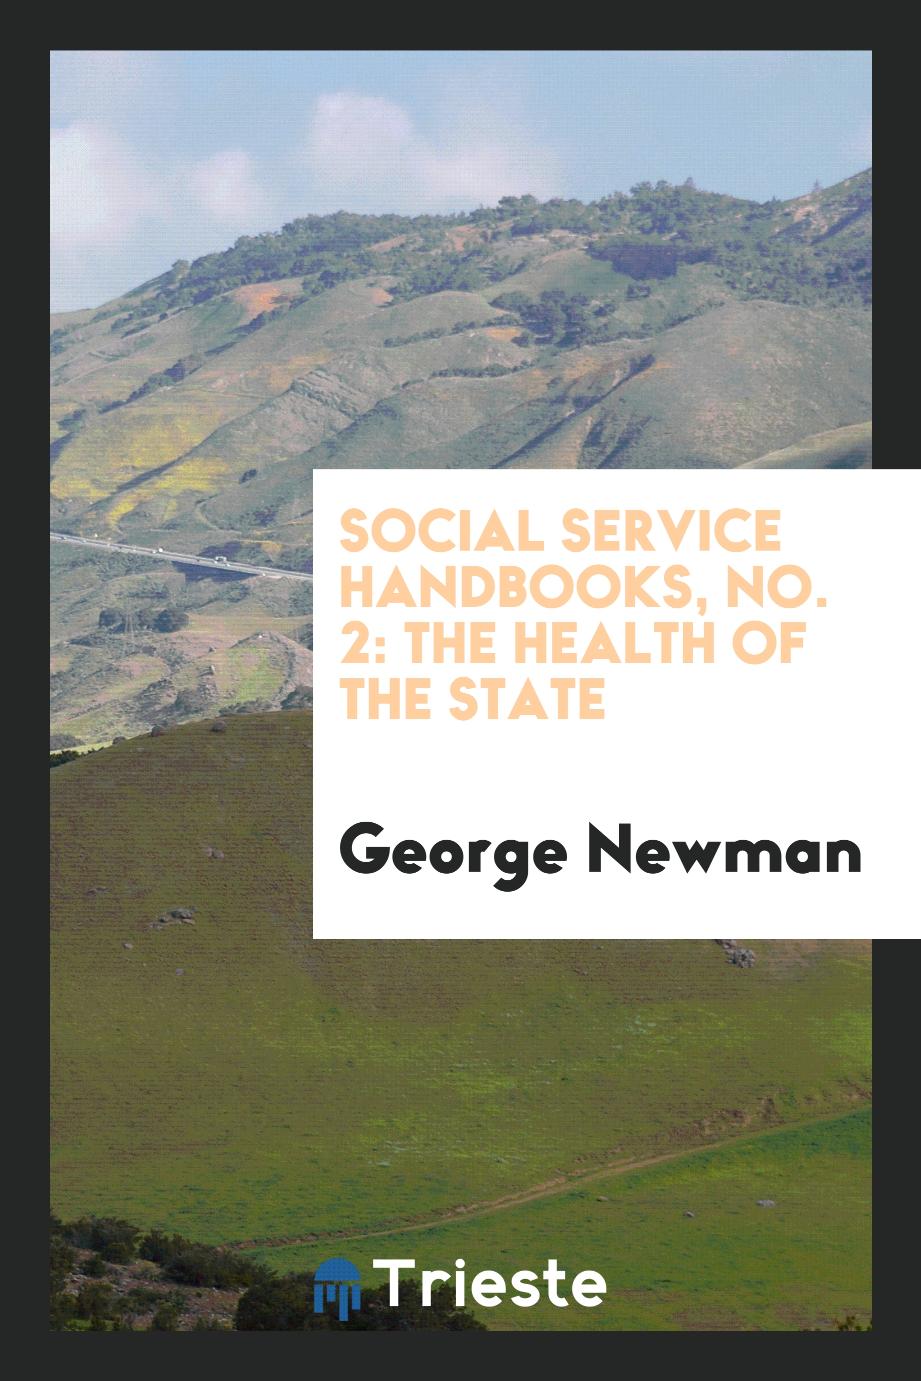 Social service handbooks, No. 2: The health of the state